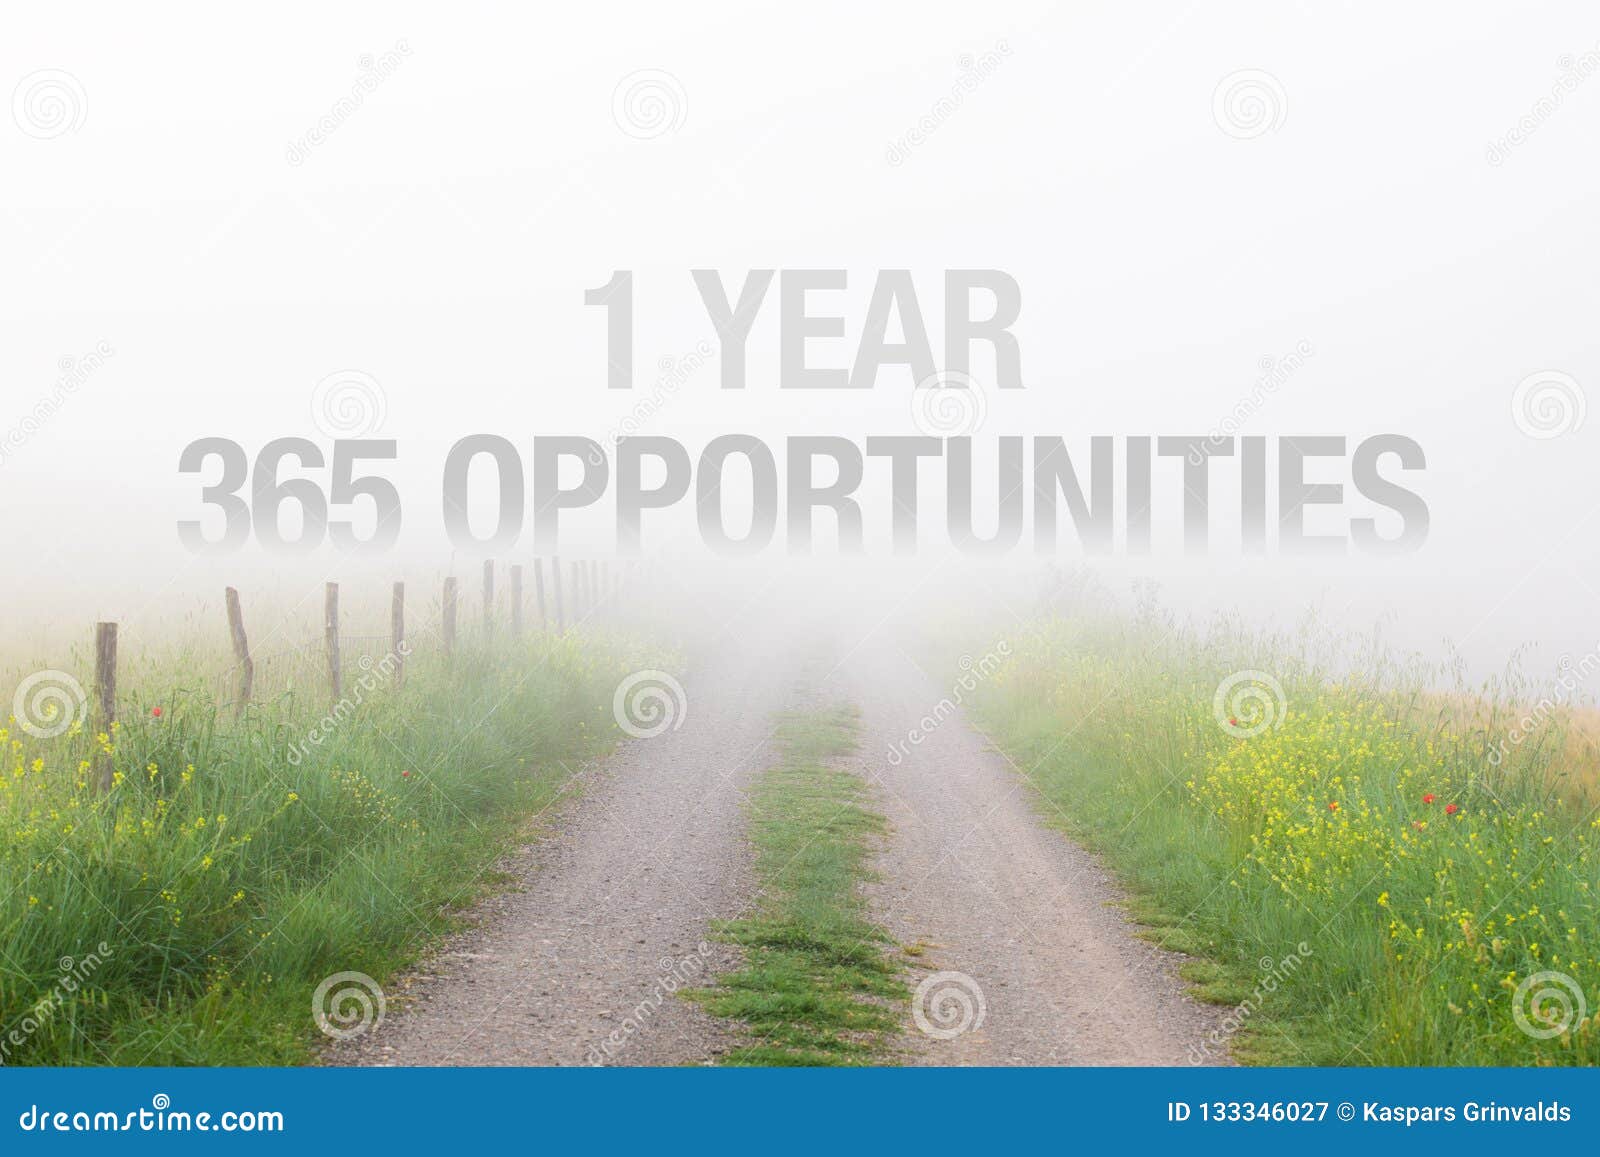 1 Year Equals 365 Opportunities Inspirational Quote For New Years Resolutions Stock Image Image Of Quote Resolutions